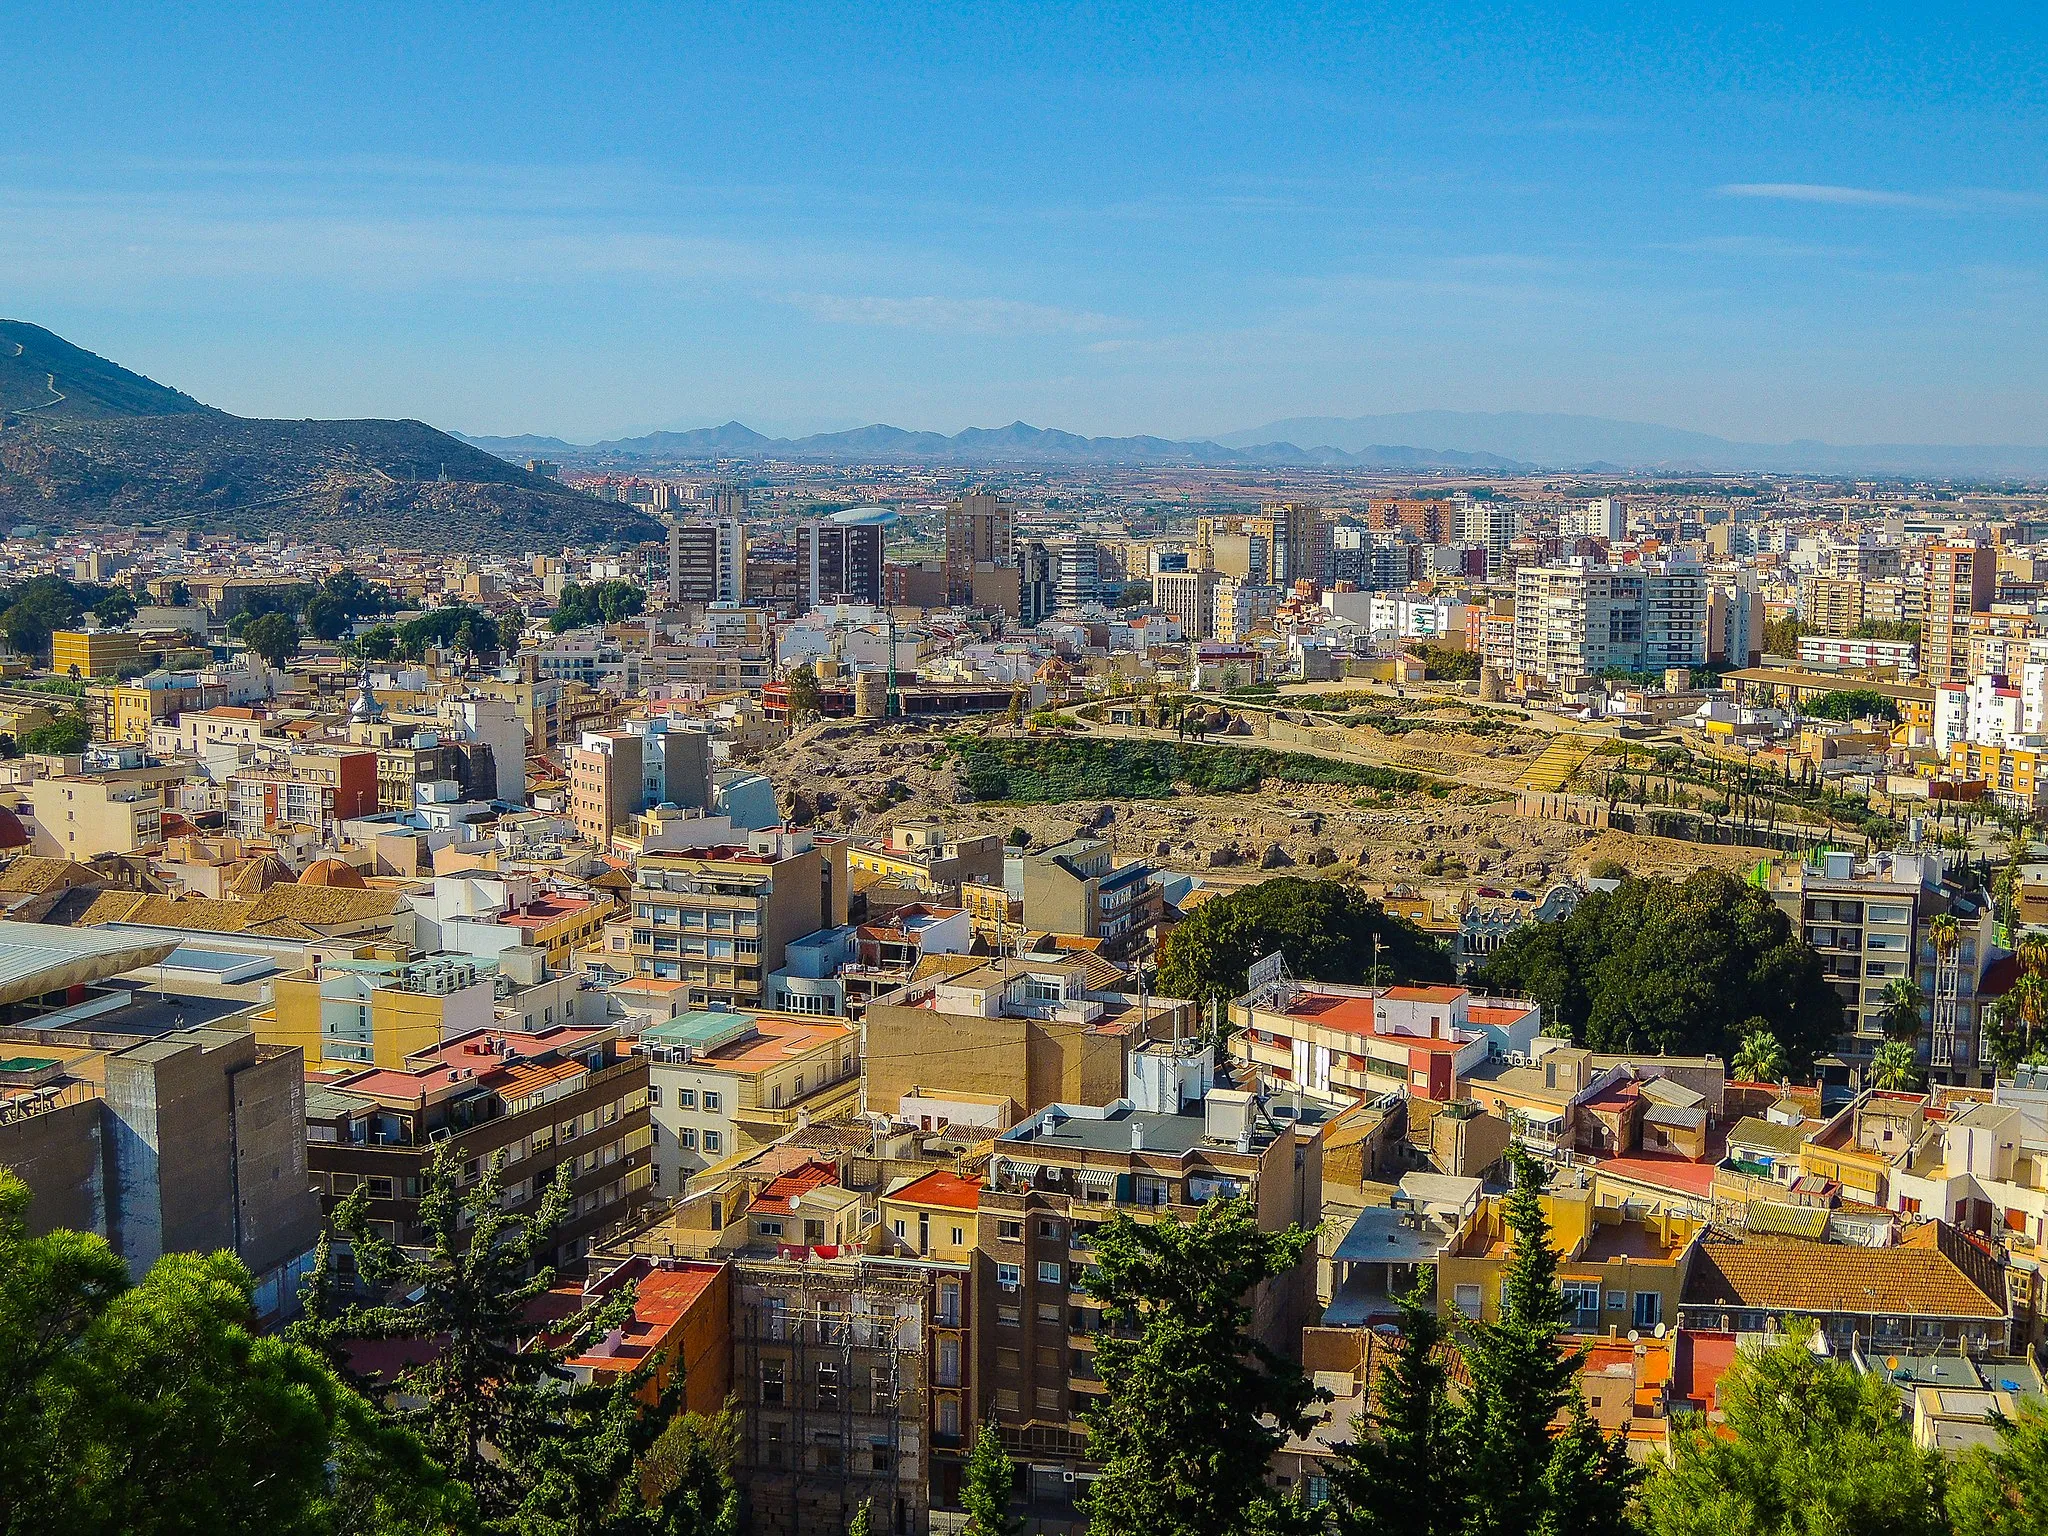 Photo showing: View of the Spanish city of Cartagena (Region of Murcia) from the viewpoint of Concepción Castle. In the center of the image the Molinete Hill Archaeological Park is seen.